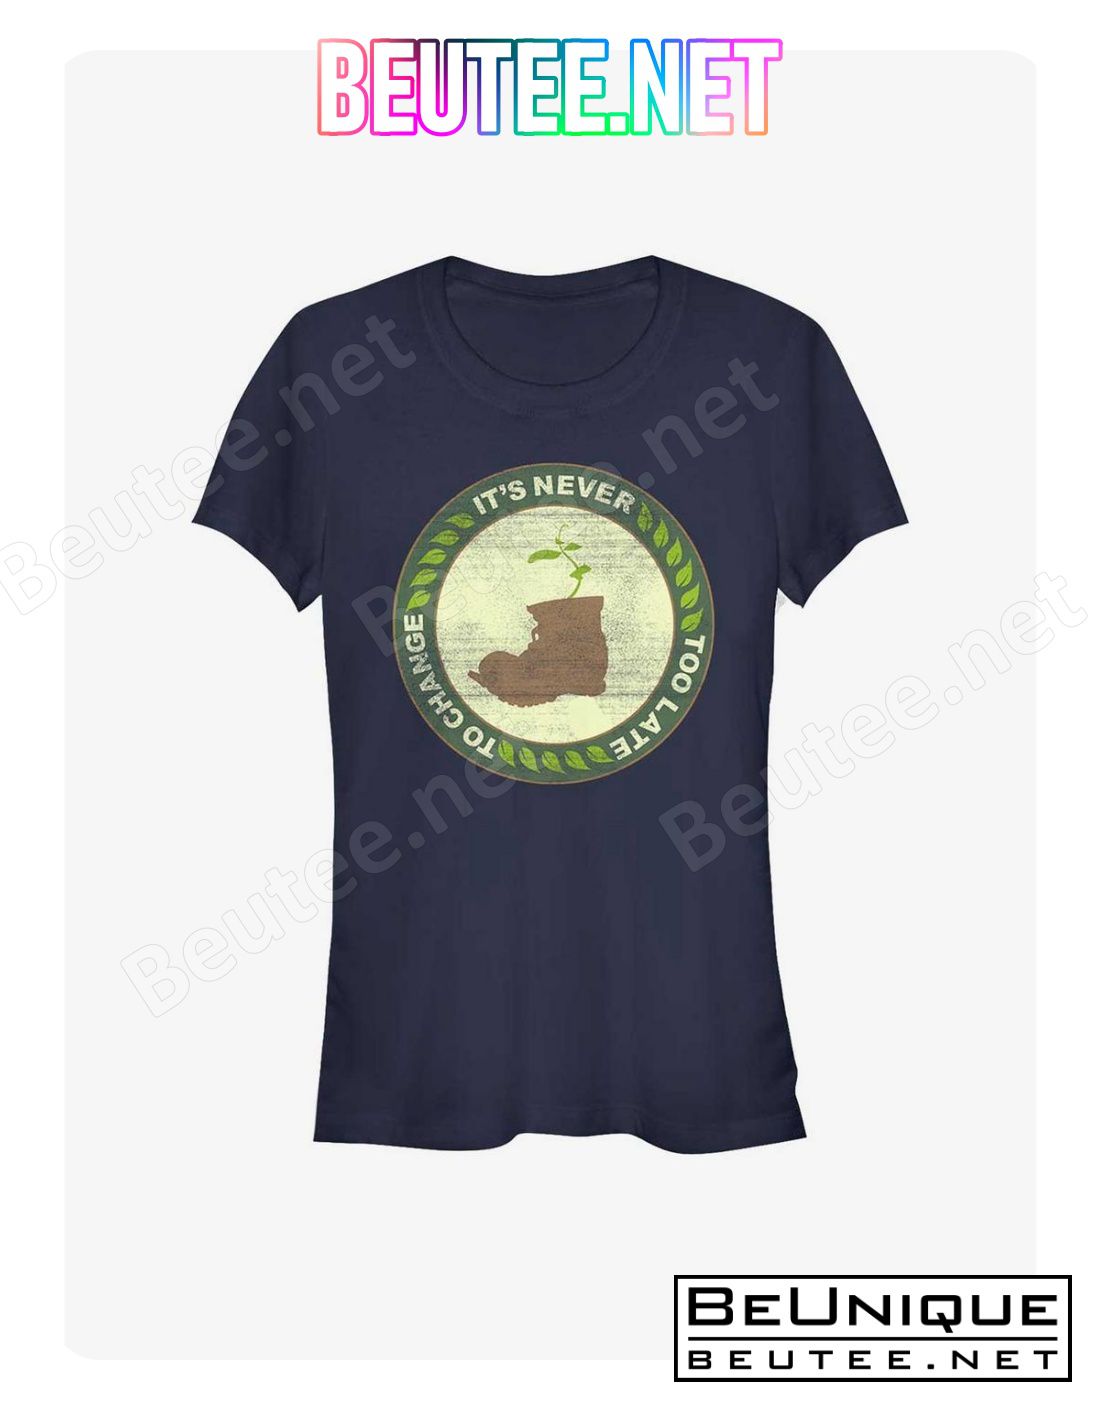 Disney Pixar Wall-E Earth Day Never Too Late To Change T-Shirt